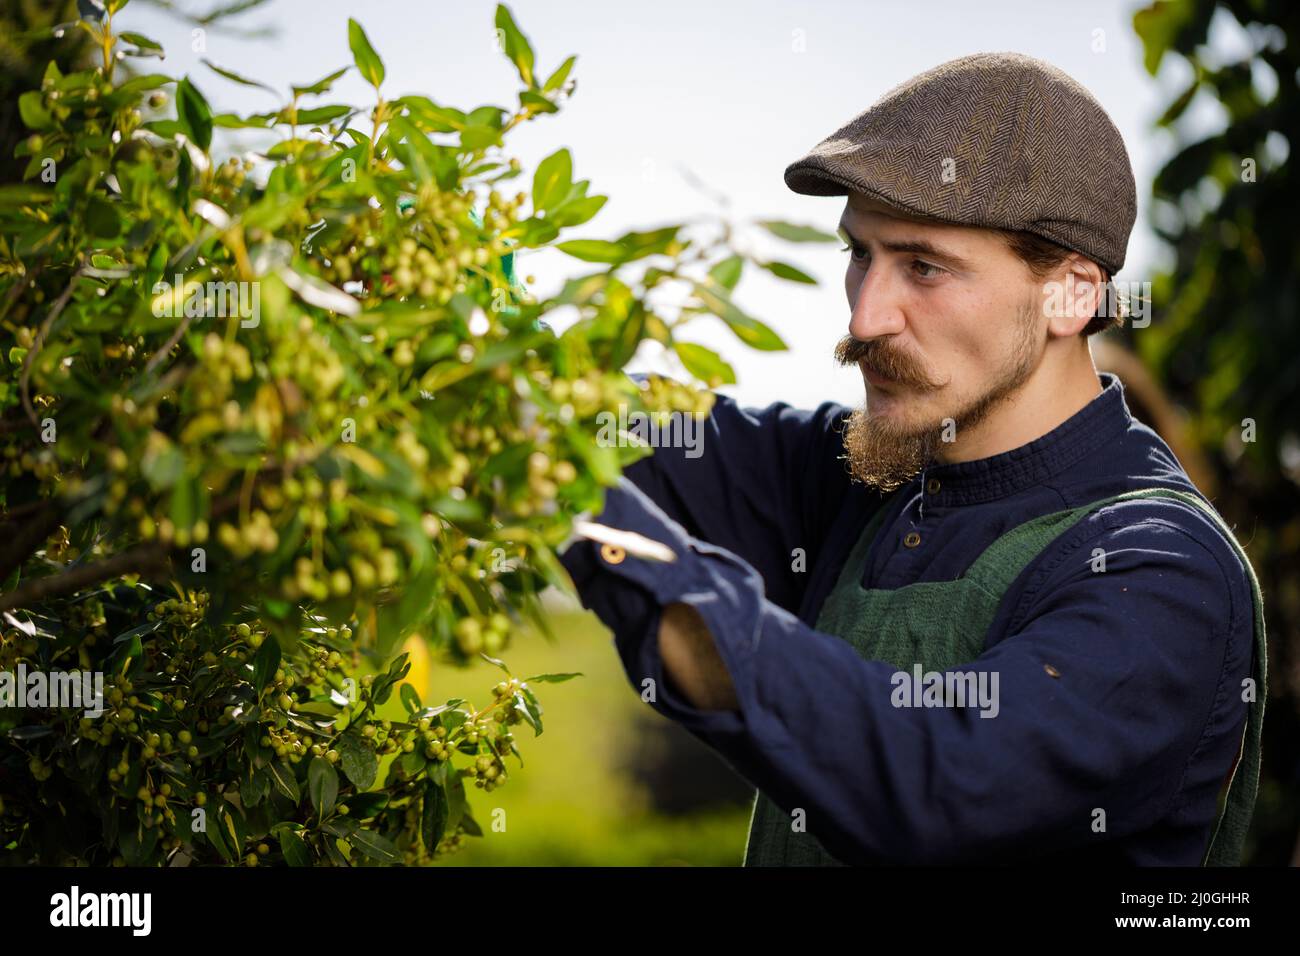 Cropped shot of a young male gardener while clipping or prune the tree in horticulture Stock Photo